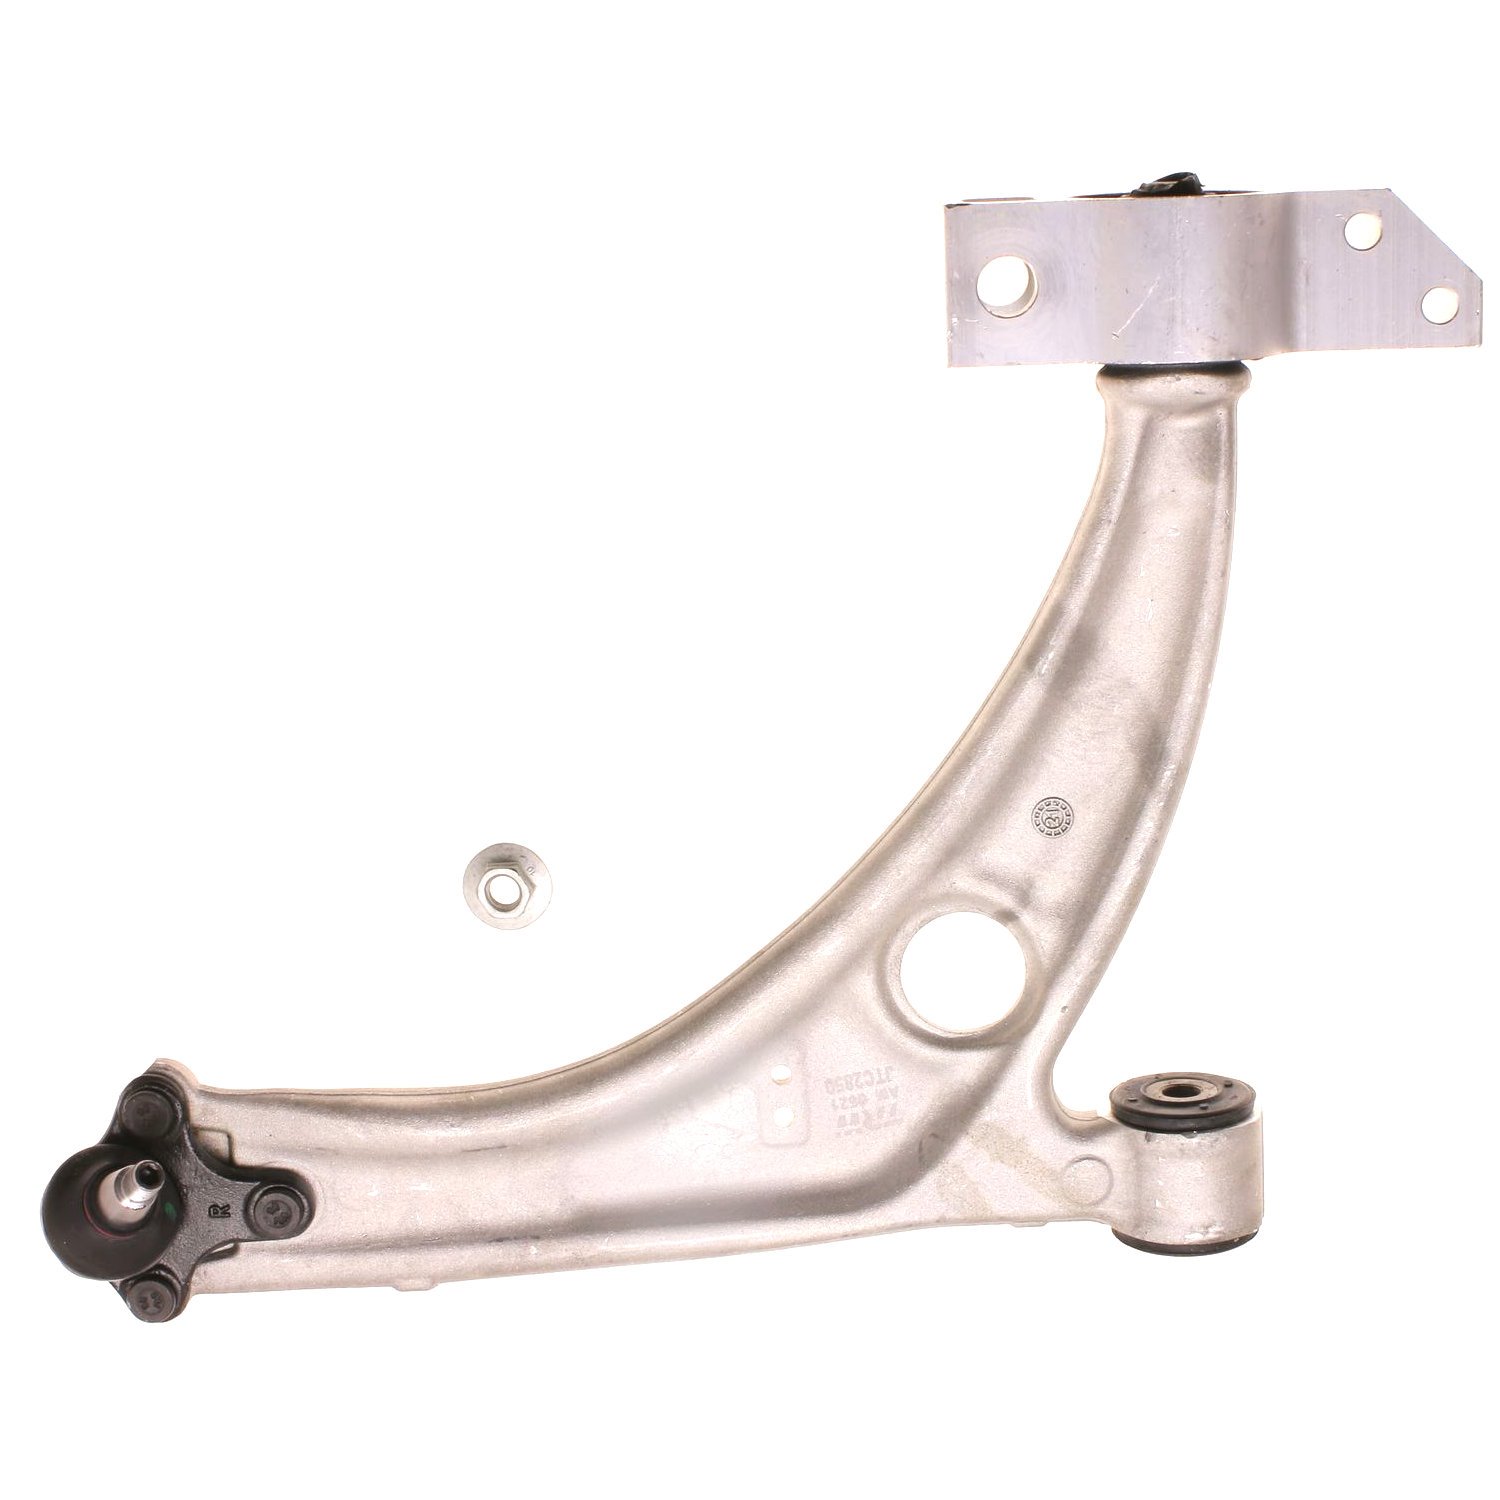 JTC2850 Control Arm Assembly Fits Select Volkswagen Models, Front Left Lower